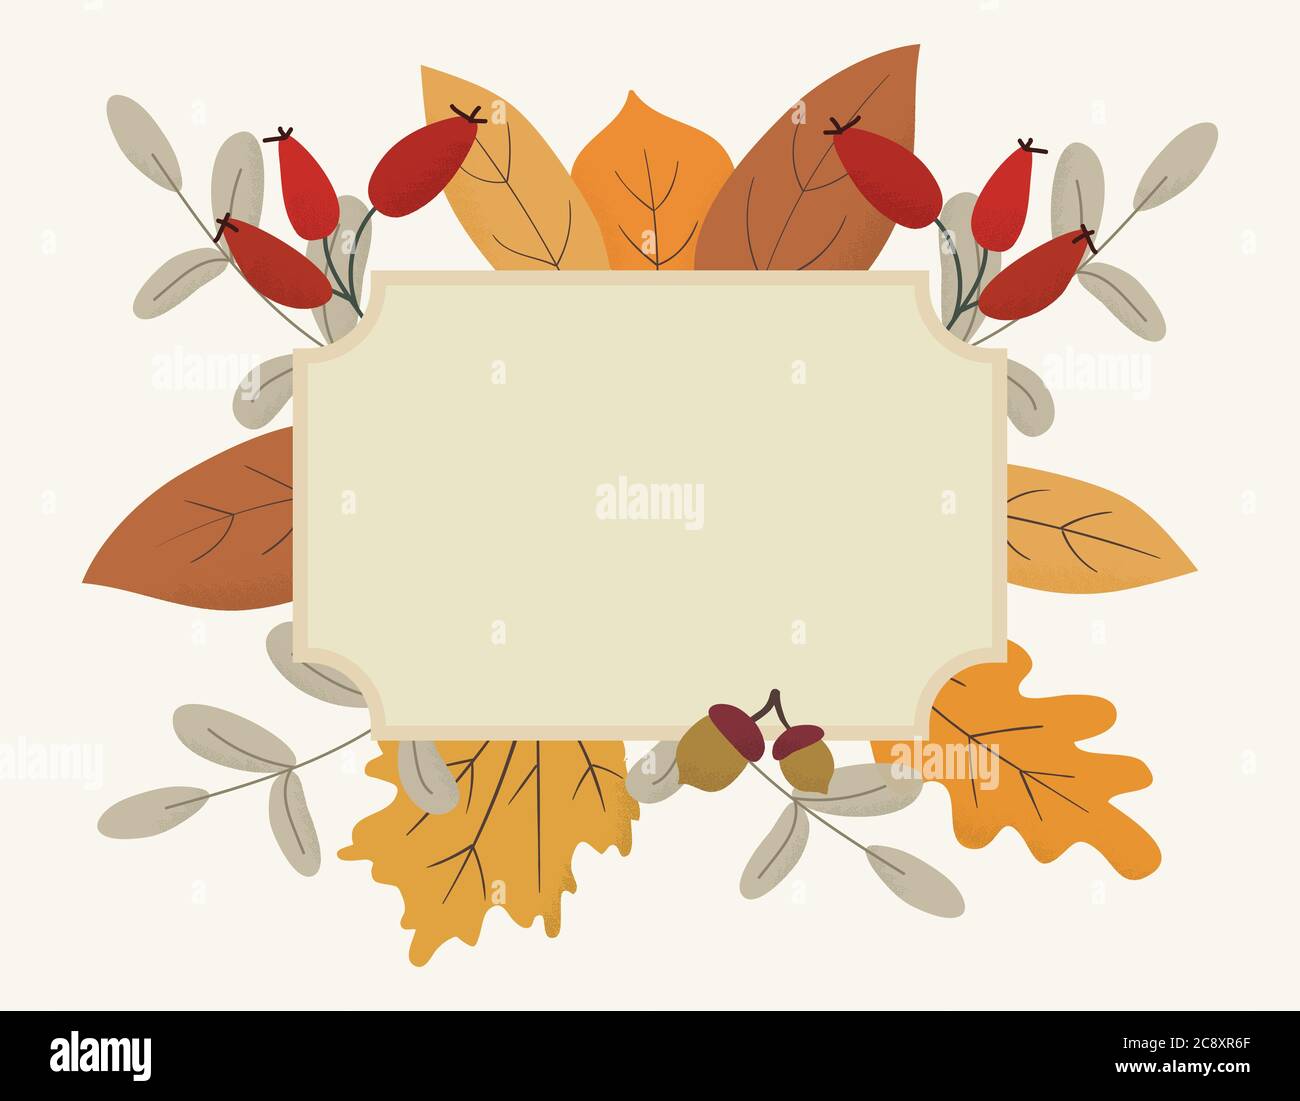 Seasonal autumn hand drawn frame vector background.Fall decorative border with dried leaves,acorns,berries and place for text.Foliage backdrop Stock Vector